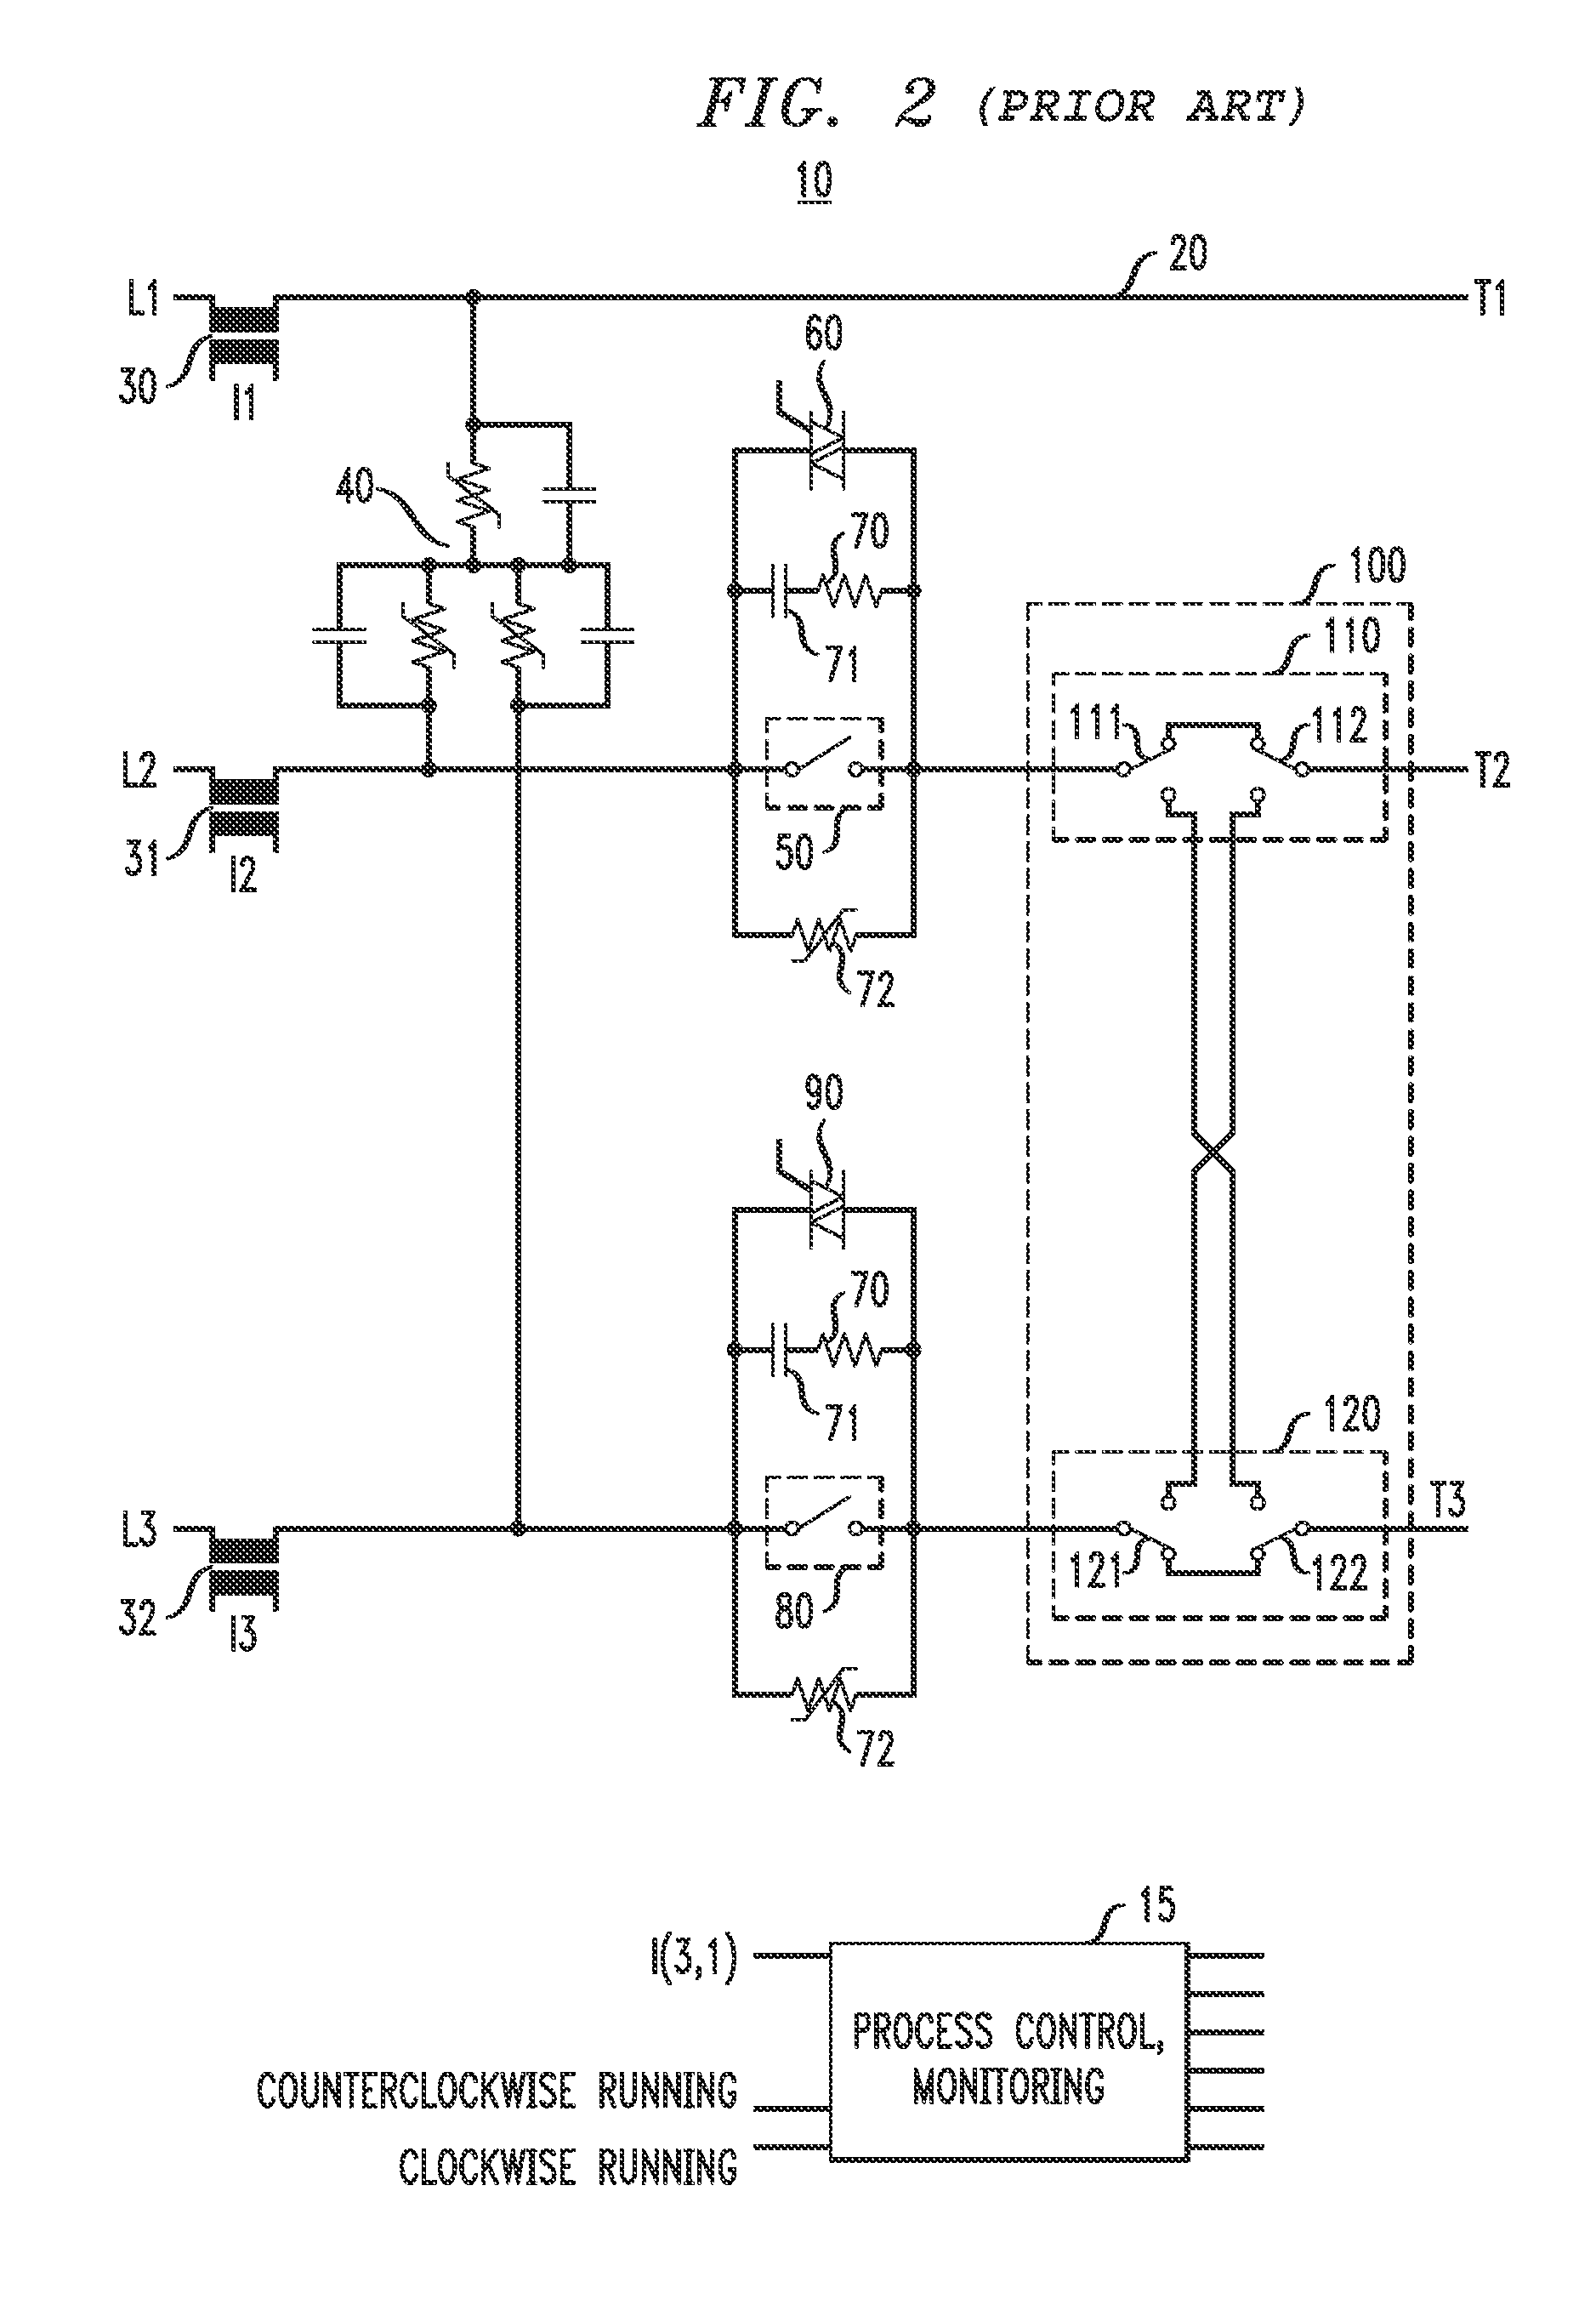 Safety switching device for setting a safety-related device to a safe state